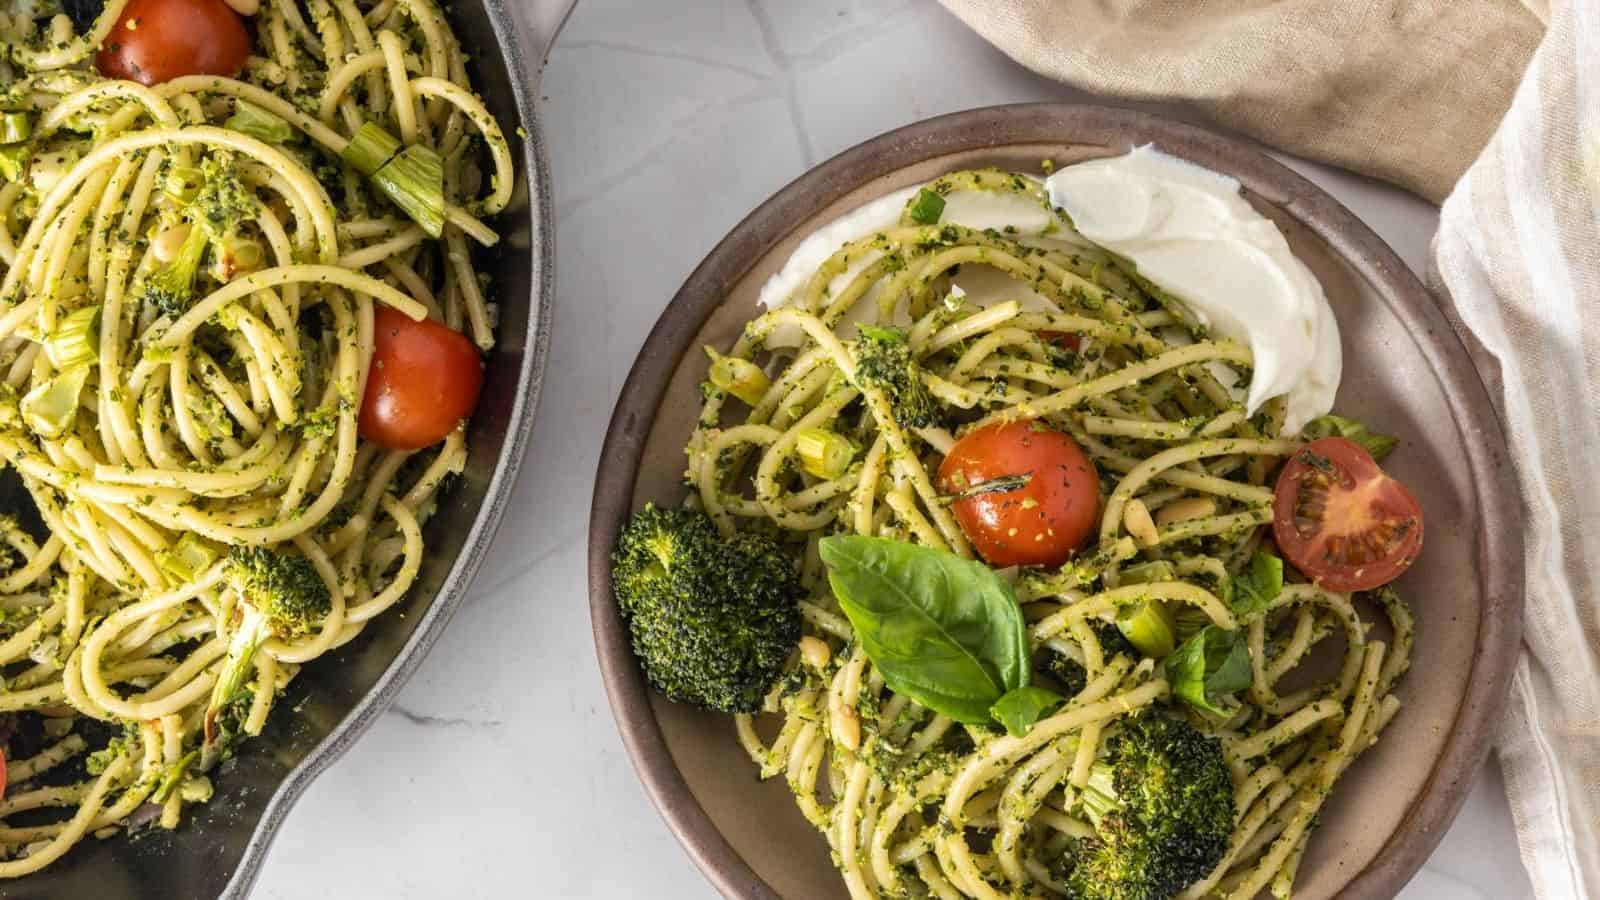 An overhead image of broccoli pesto pasta served in a plate.